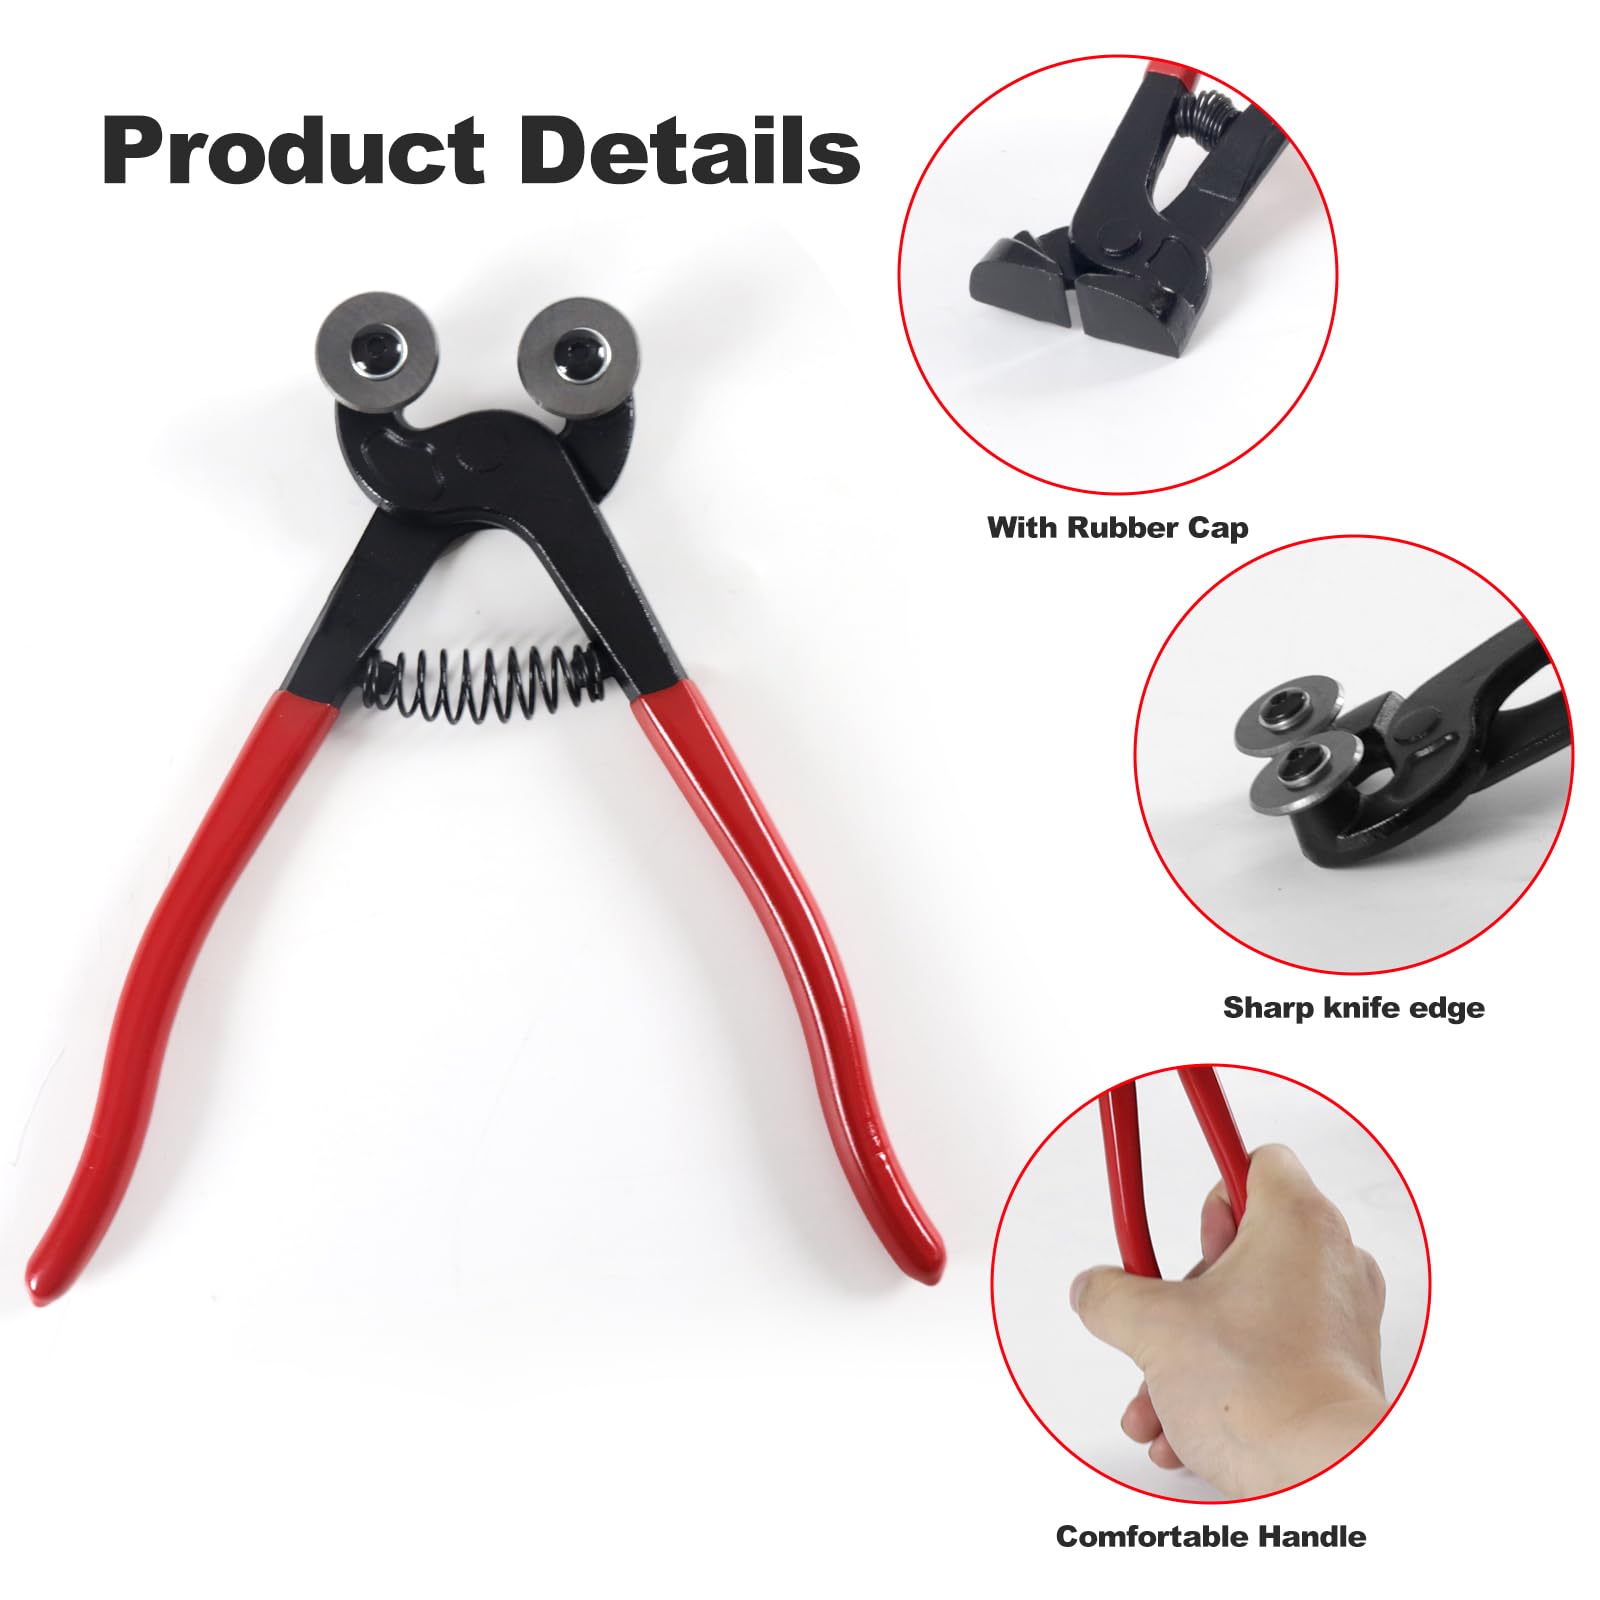 Glass Cutter - Mosaic Plier, 200mm Heavy-duty Glass Mosaic Cut Nippers  Ceramic Tile Wheel Wheeled Cutter Pliers Tool for DIY Trimming Work Double